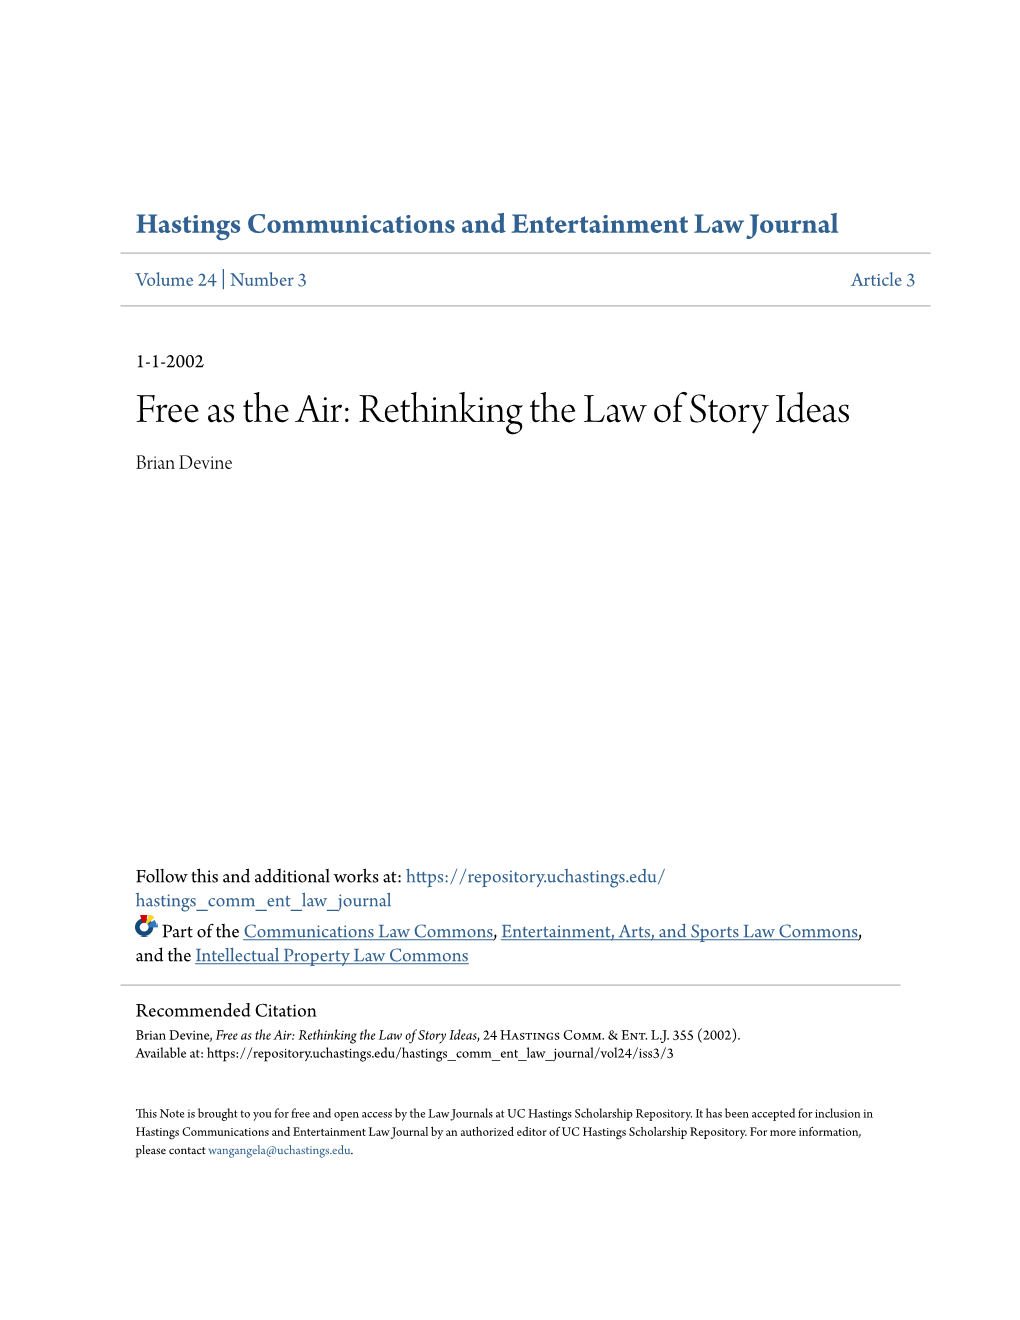 Rethinking the Law of Story Ideas Brian Devine